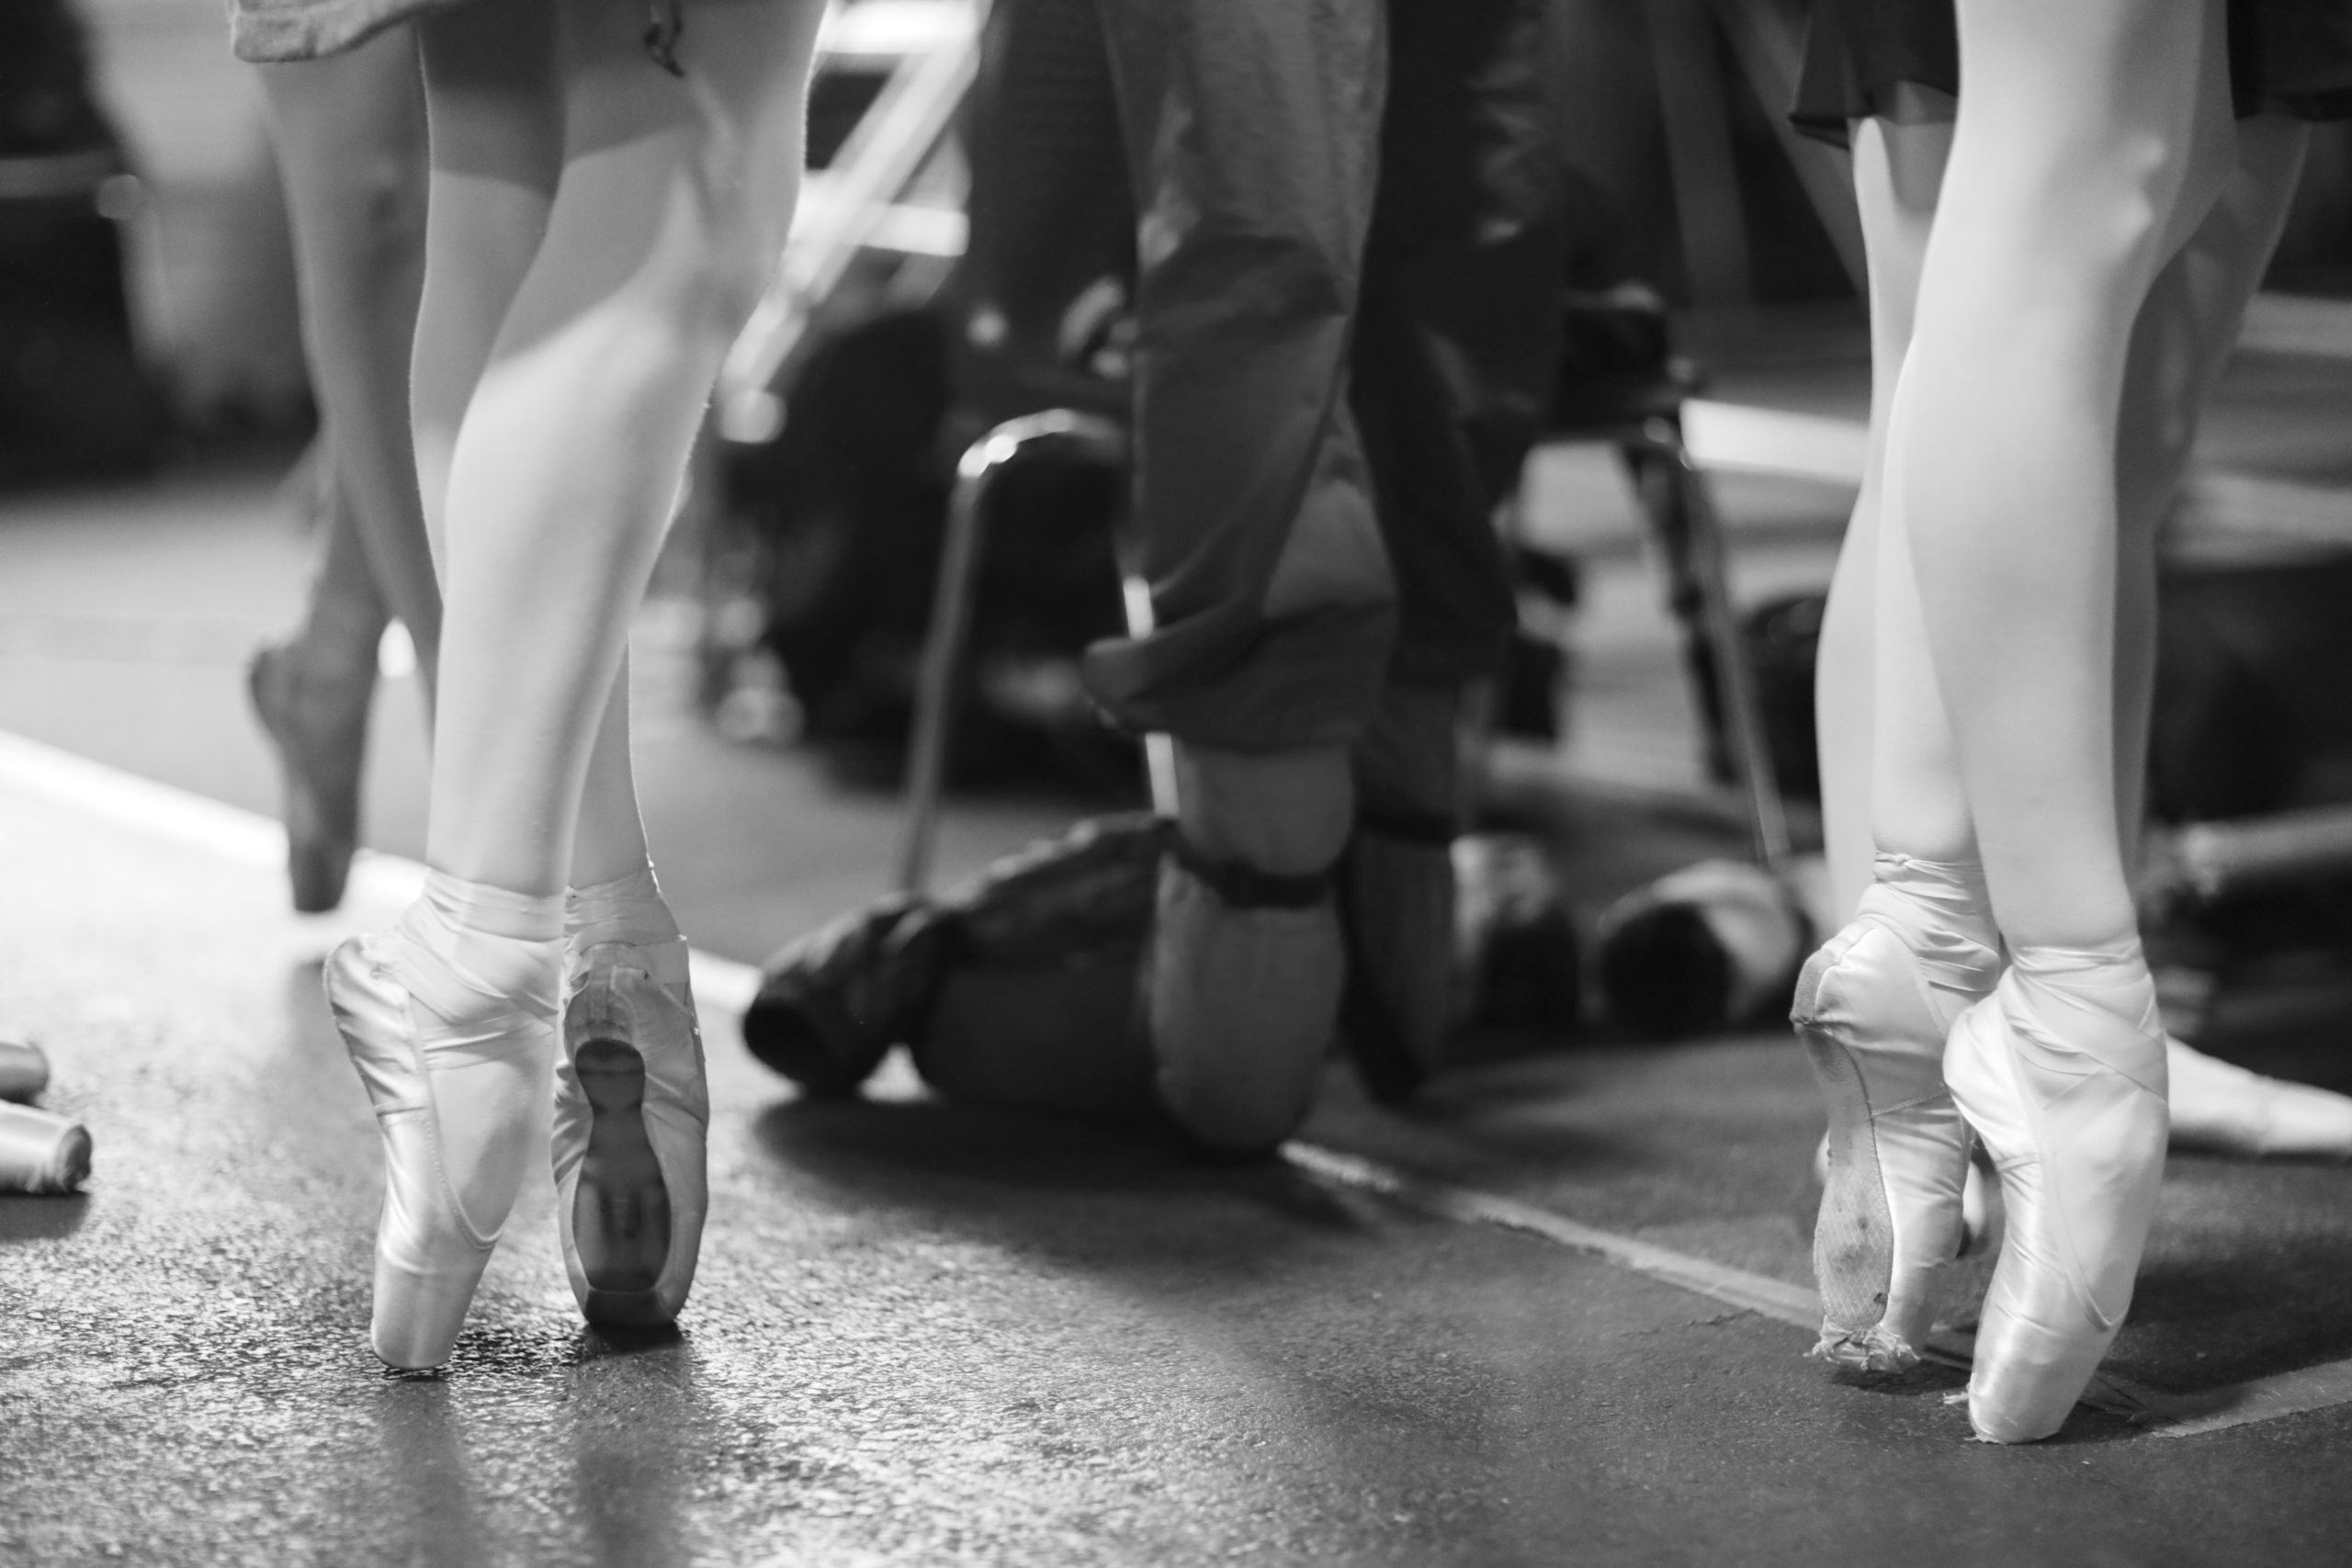 Black and white image of dancers' legs standing in fifth position en pointe